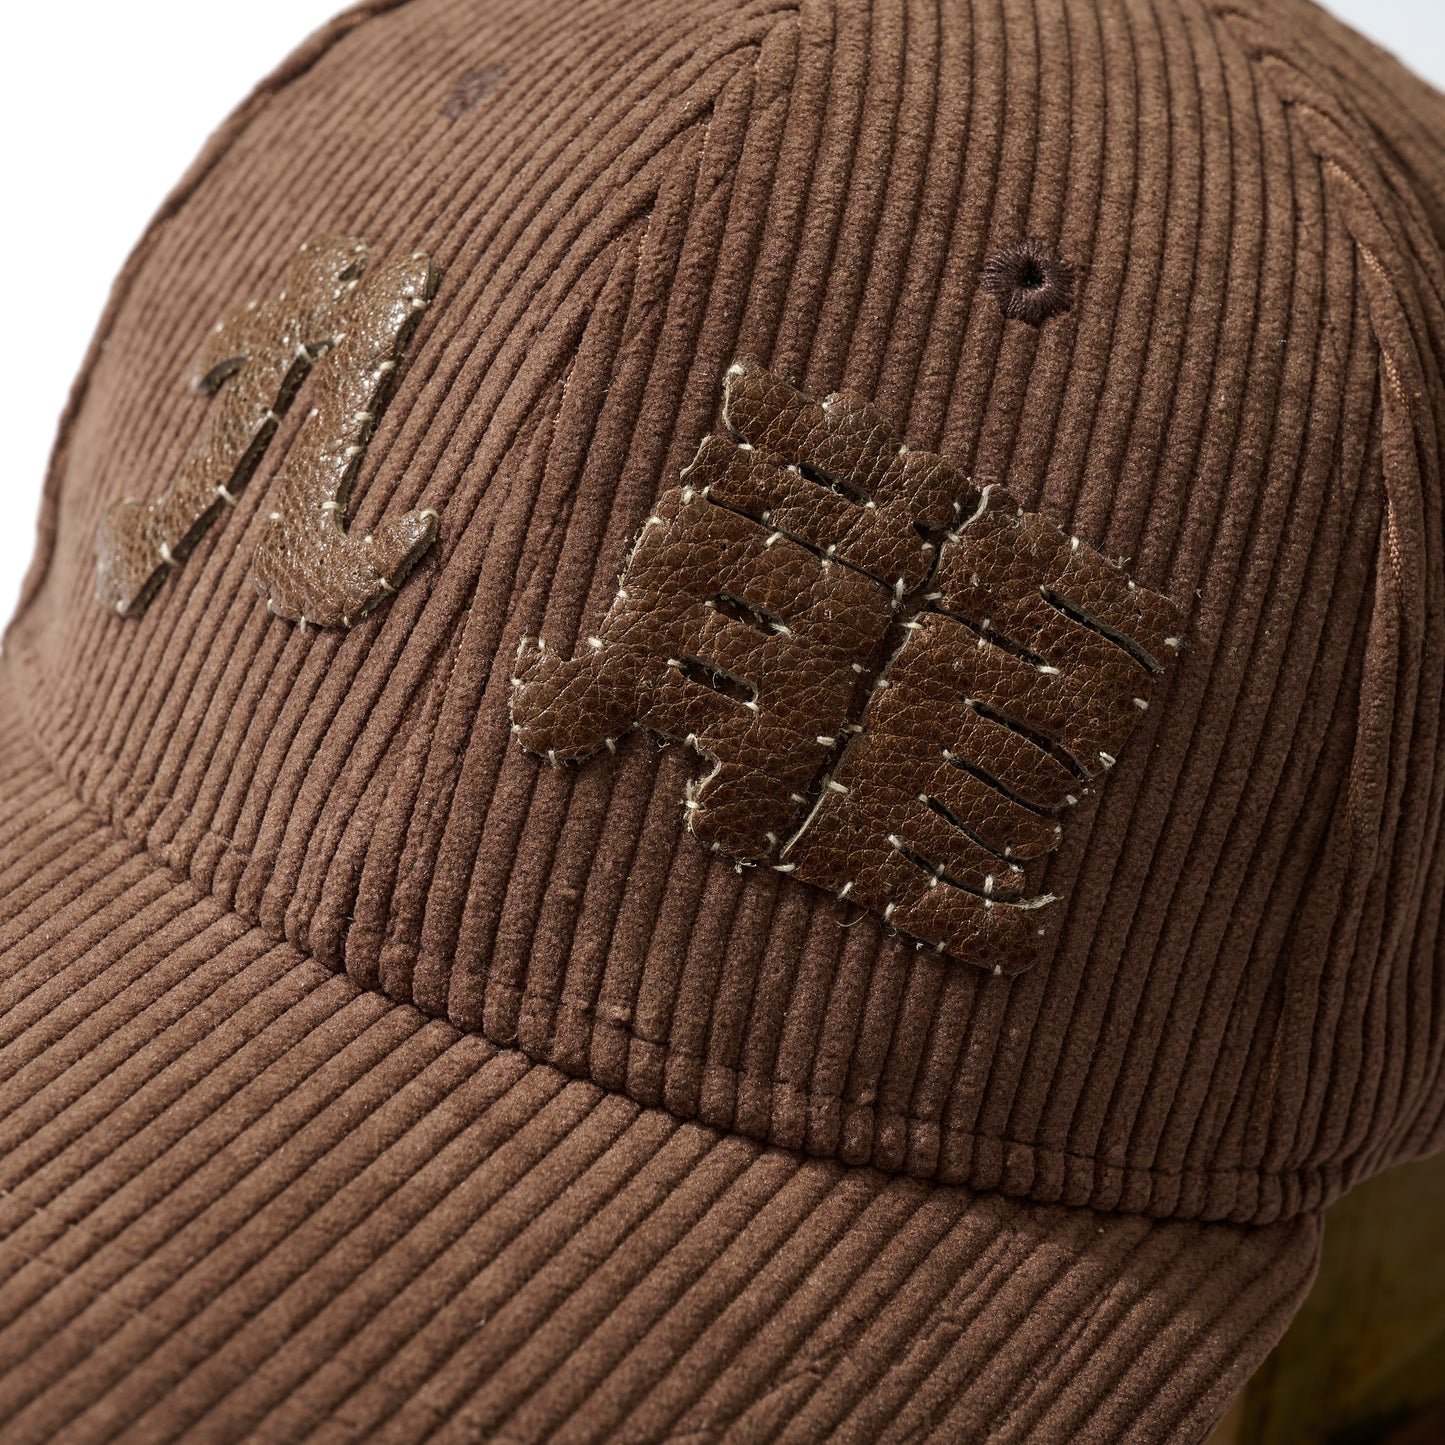 [NEW YEAR EDITION] CORDUROY HAND QUILTED “KOWLOON” CAP